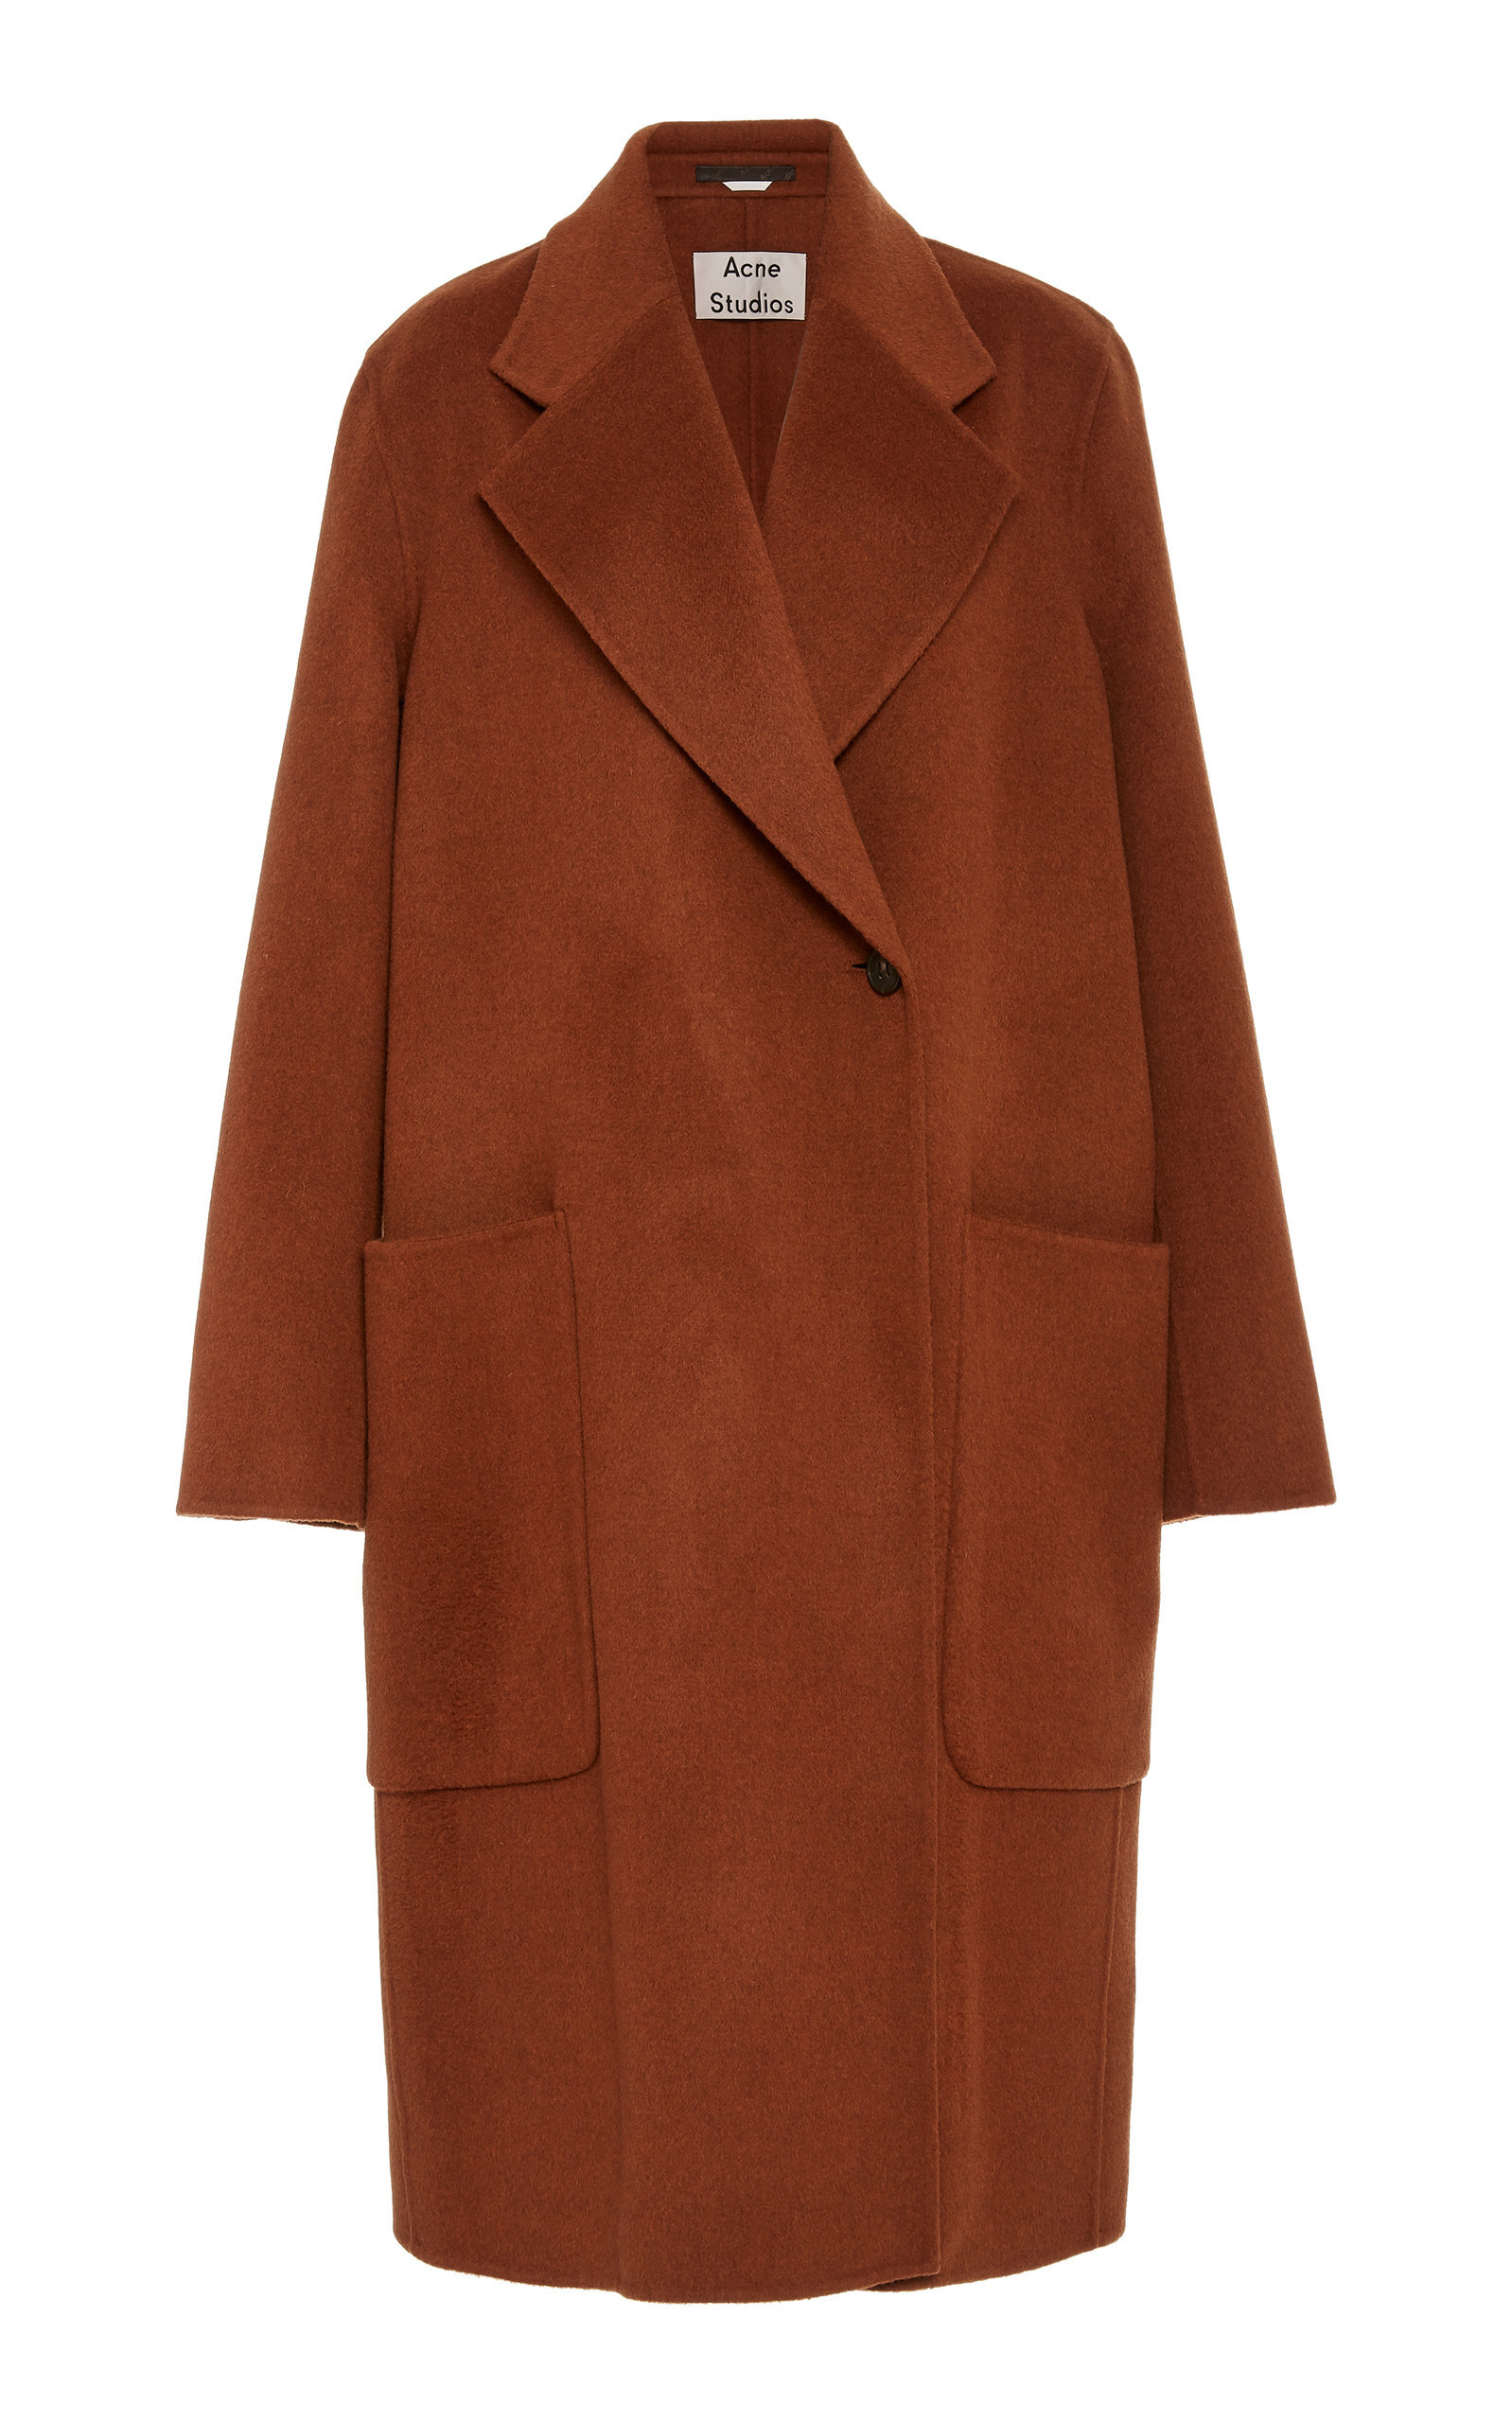 large_acne-studios-brown-carice-double-breasted-wool-blend-coat.jpg